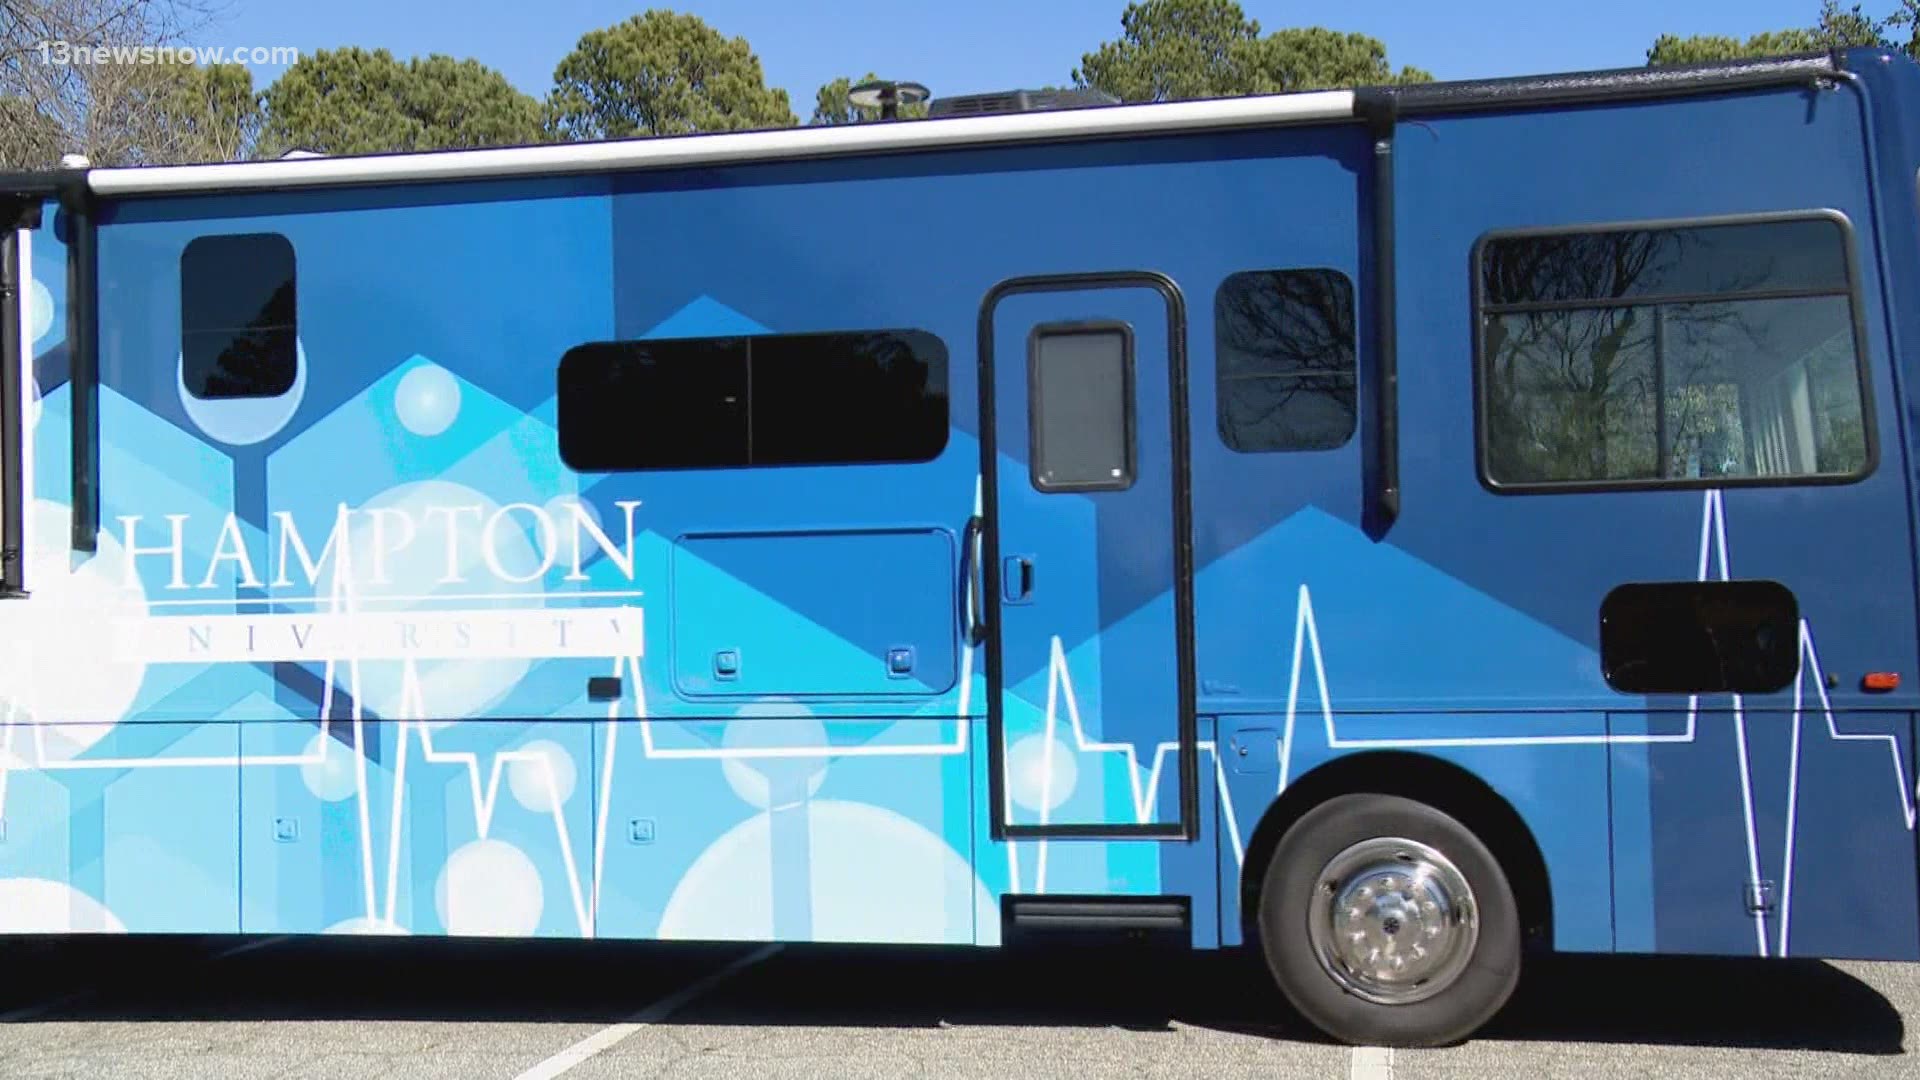 Hampton University said it will use its new mobile vaccination clinic to provide COVID-19 vaccine to people in underserved areas of Hampton Roads.